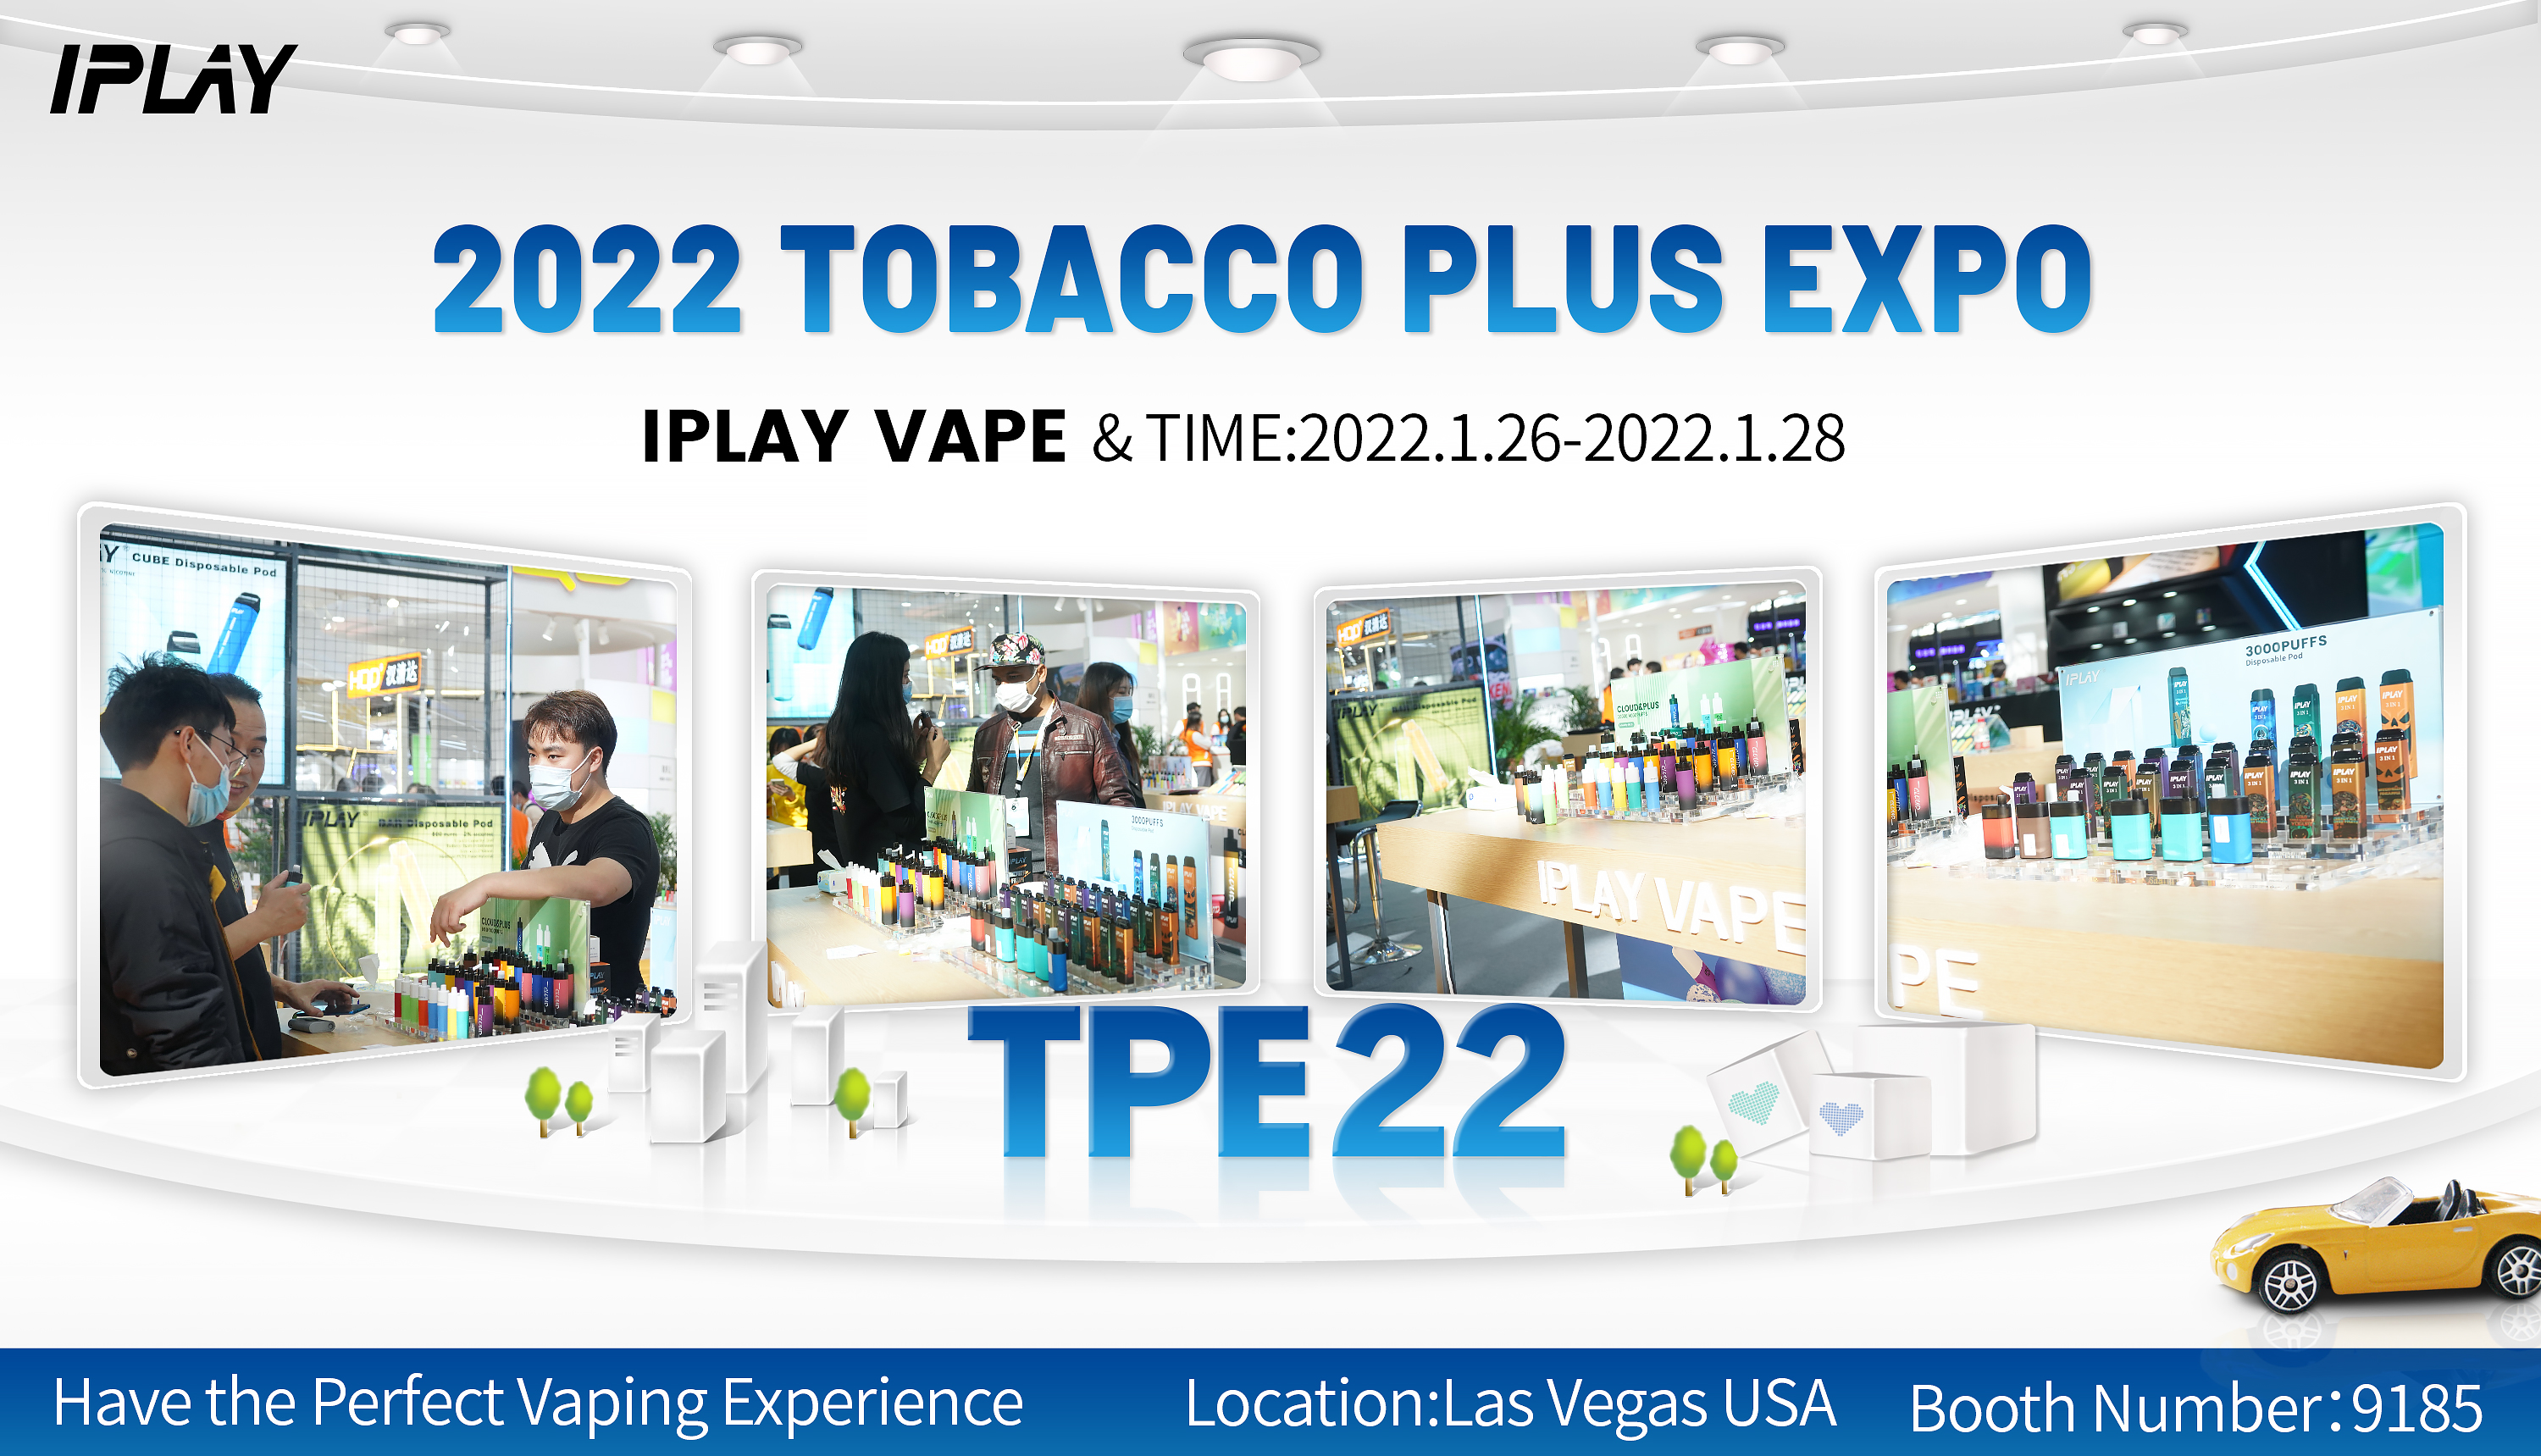 IplayVape is waiting for you at the TPE show